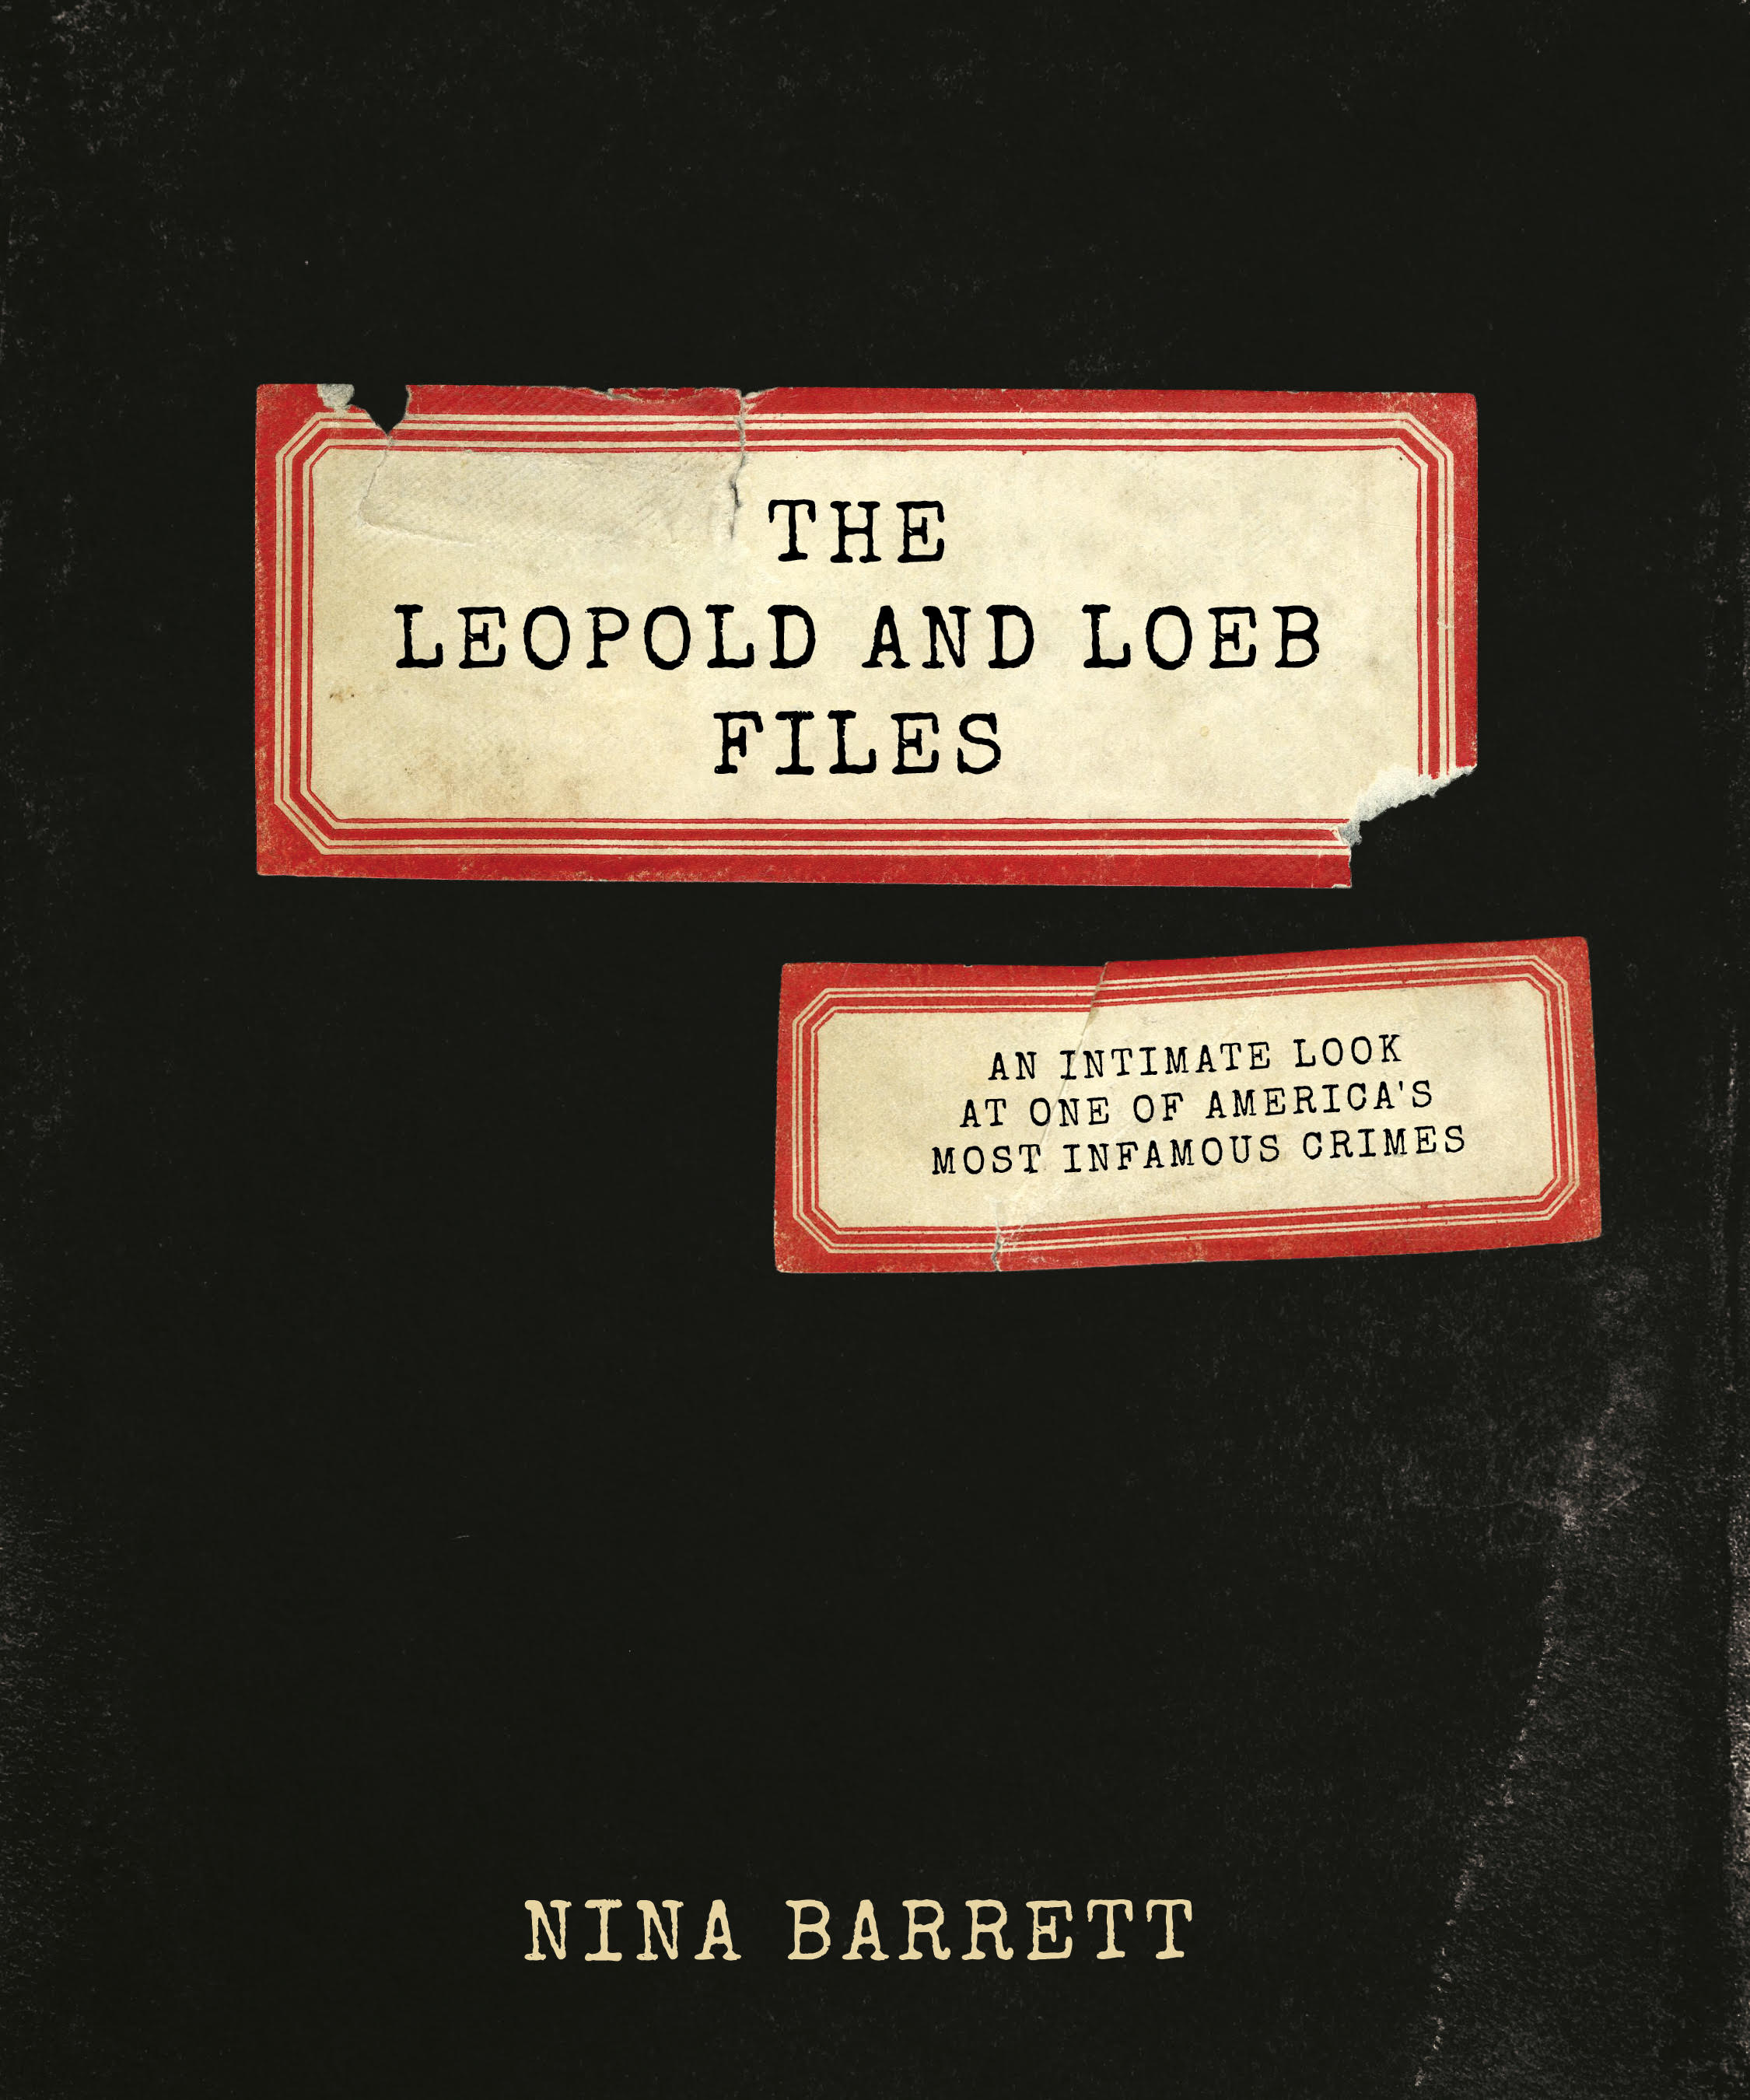 Leopold and Loeb Files book cover